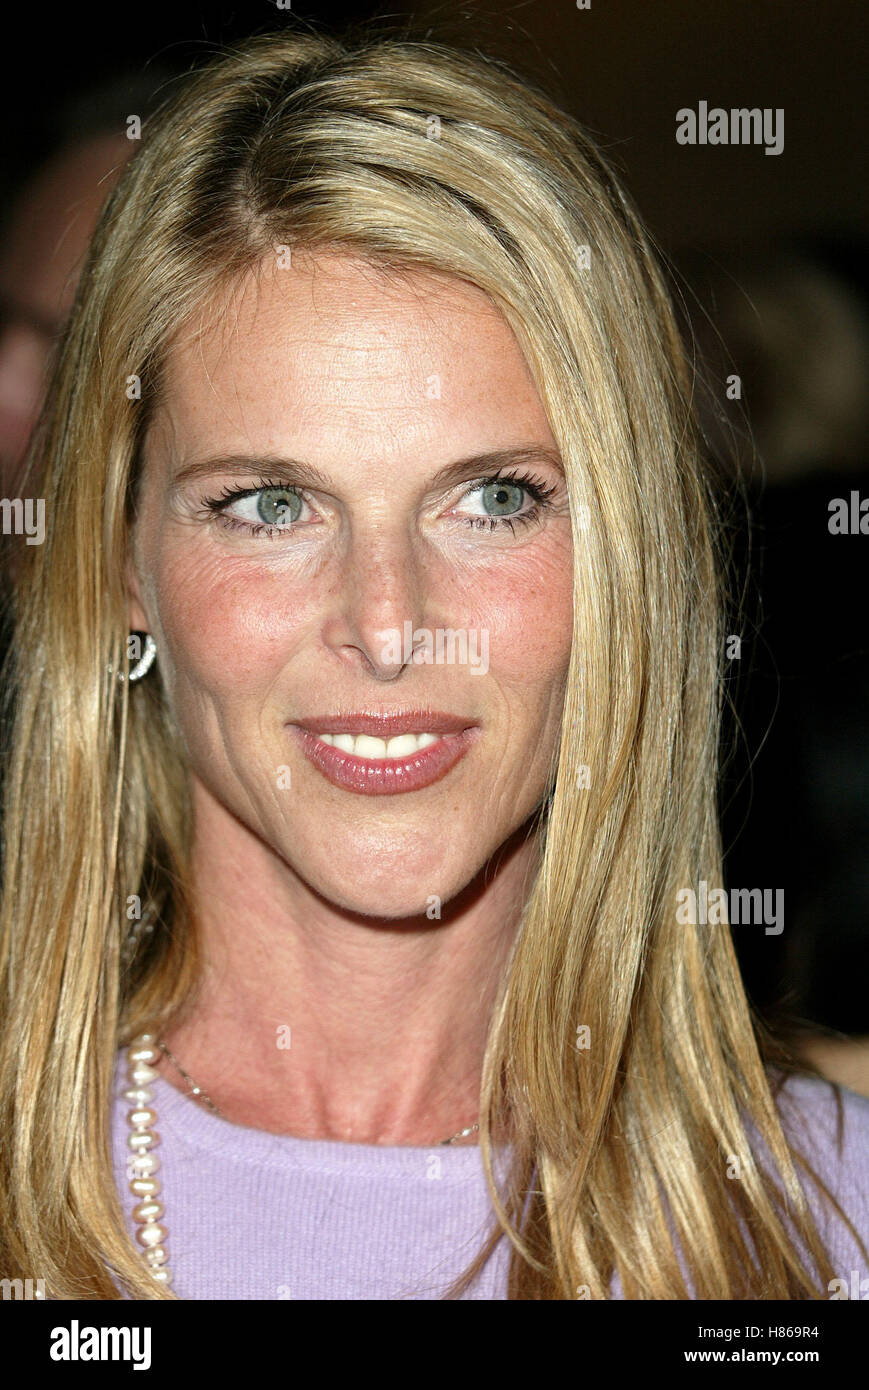 CATHERINE OXENBERG 2ND ADOPT-A-MINEFIELD BENEFIT CENTURY PLAZA HOTEL CENTURY CITY LOS ANGELES USA 18 September 2002 Stock Photo